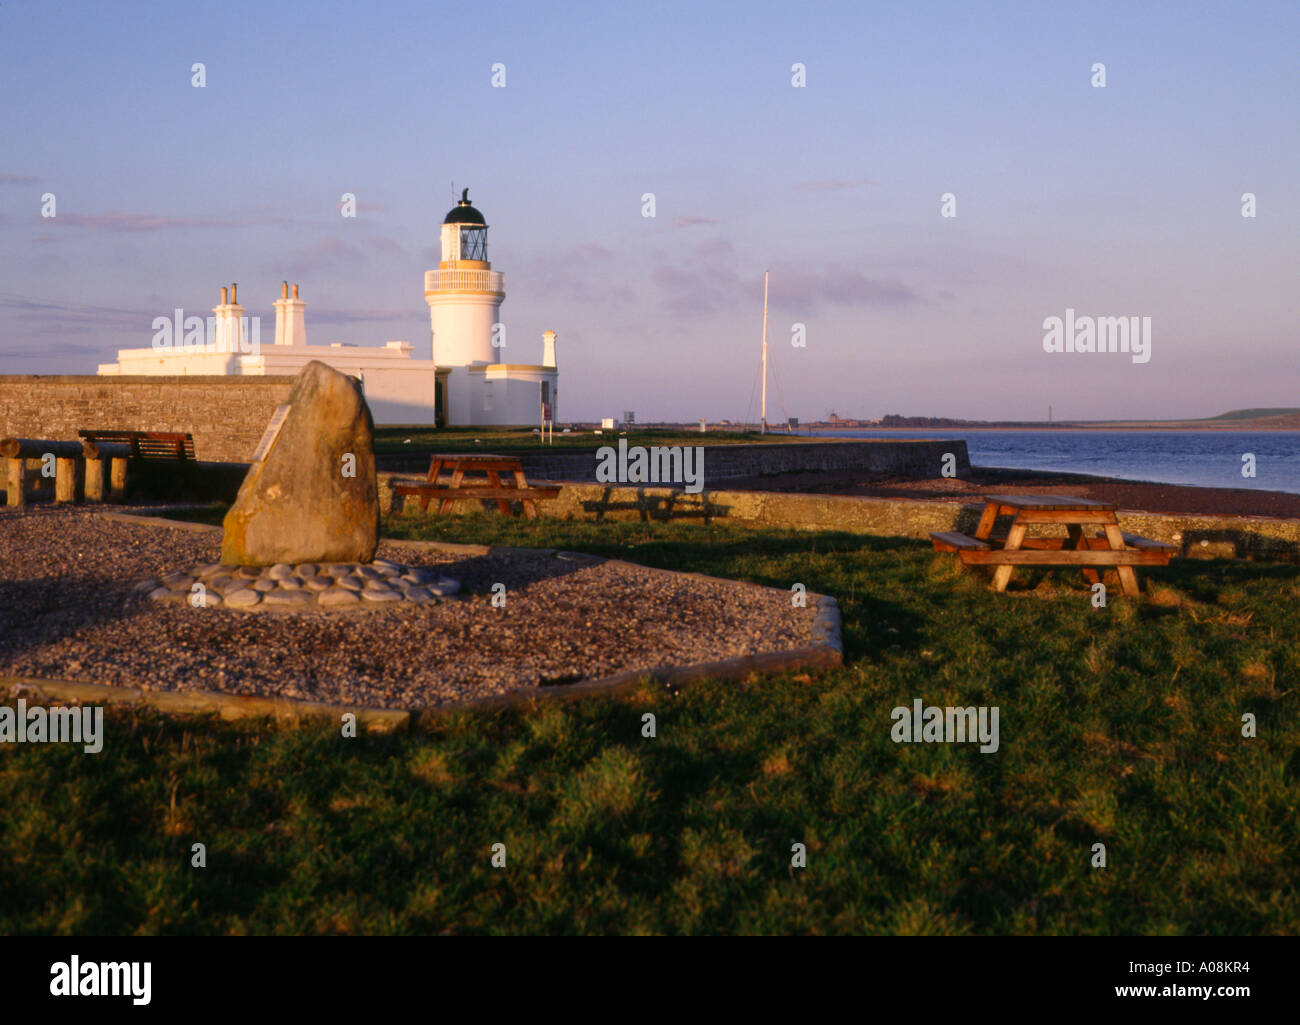 dh Brahan Seer monument FORTROSE ROSS CROMARTY Chanonery Point picnic area and lighthouse Moray Firth Stock Photo